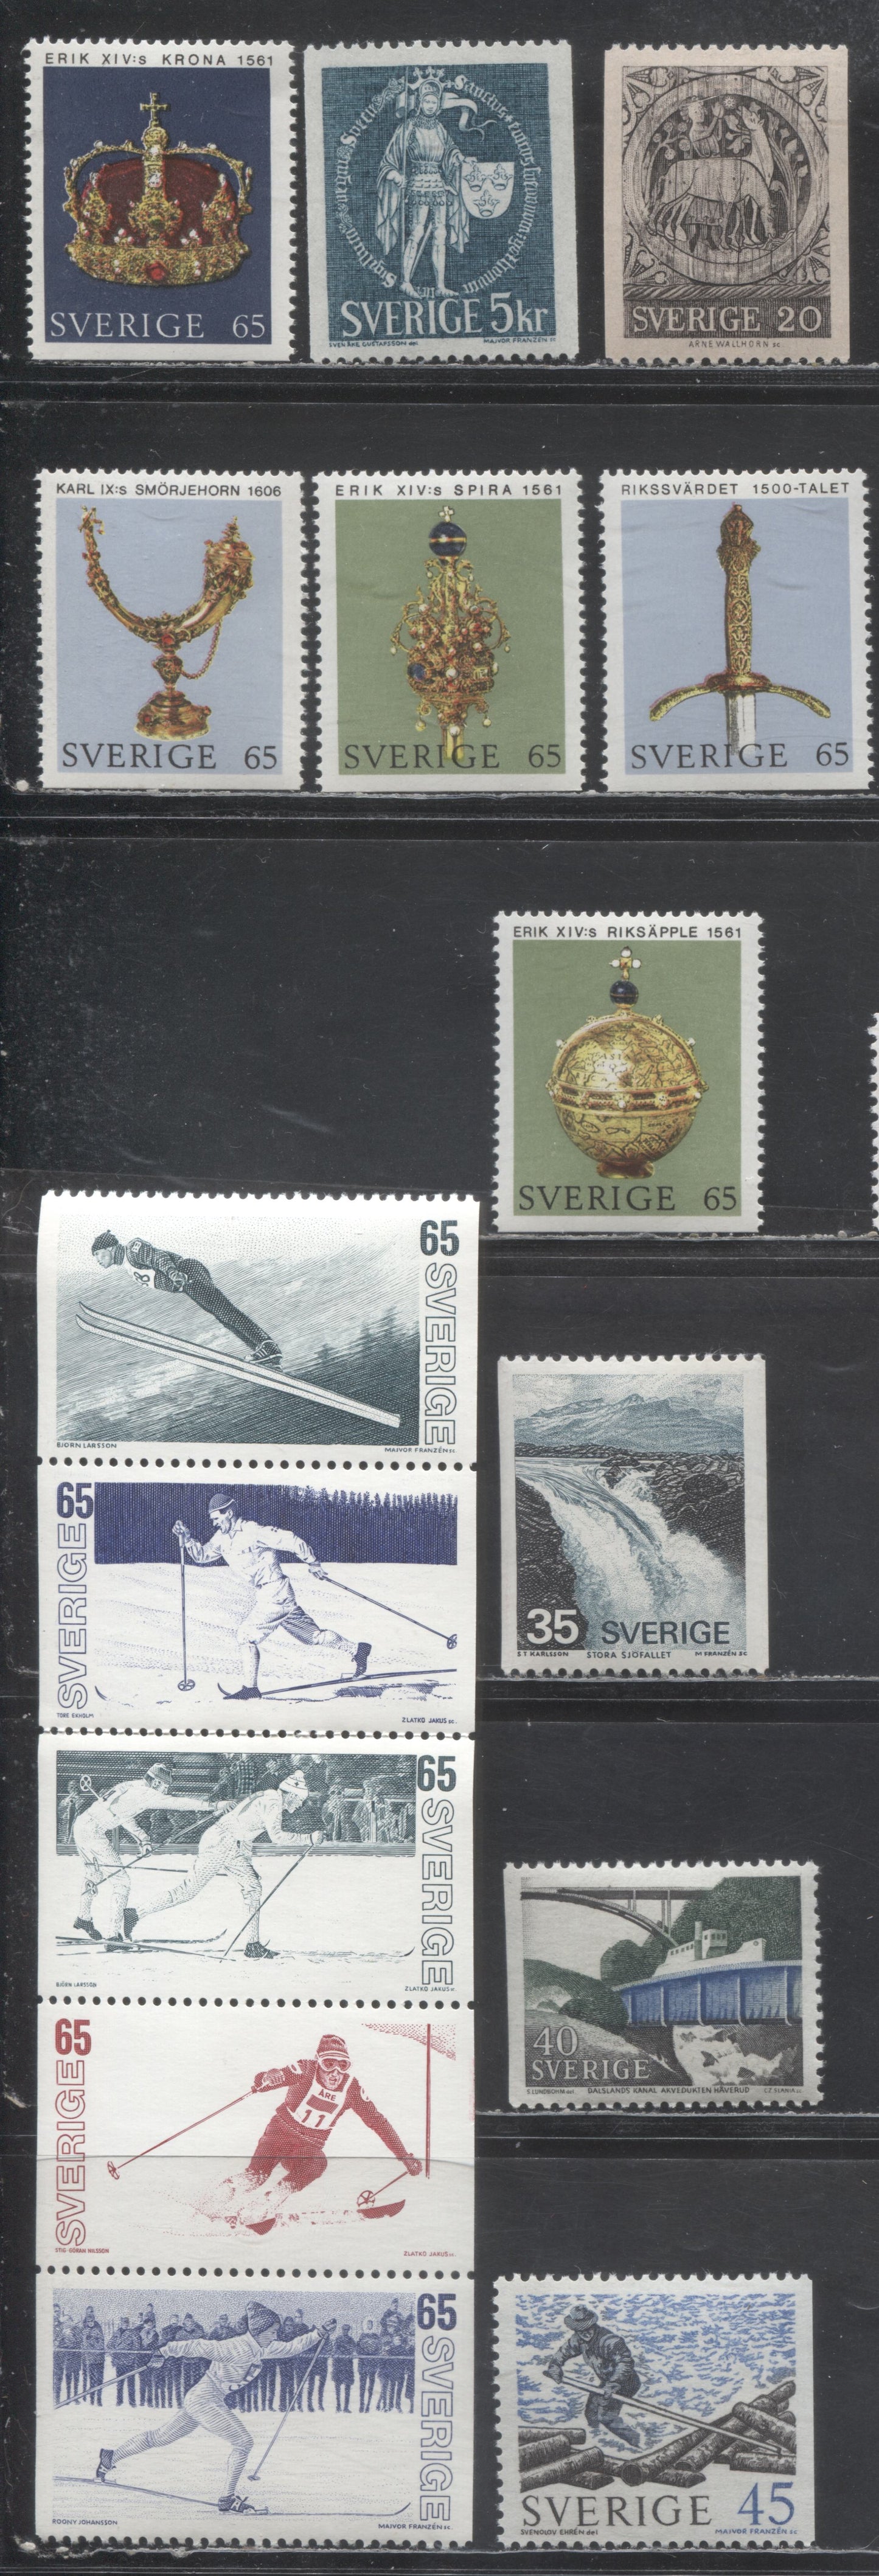 Lot 23 Sweden SC#740/1035 1967-1972 Definitives - 1974 Great Falls Definitive, 15 VFNH Singles, Click on Listing to See ALL Pictures, 2017 Scott Cat. $8.4